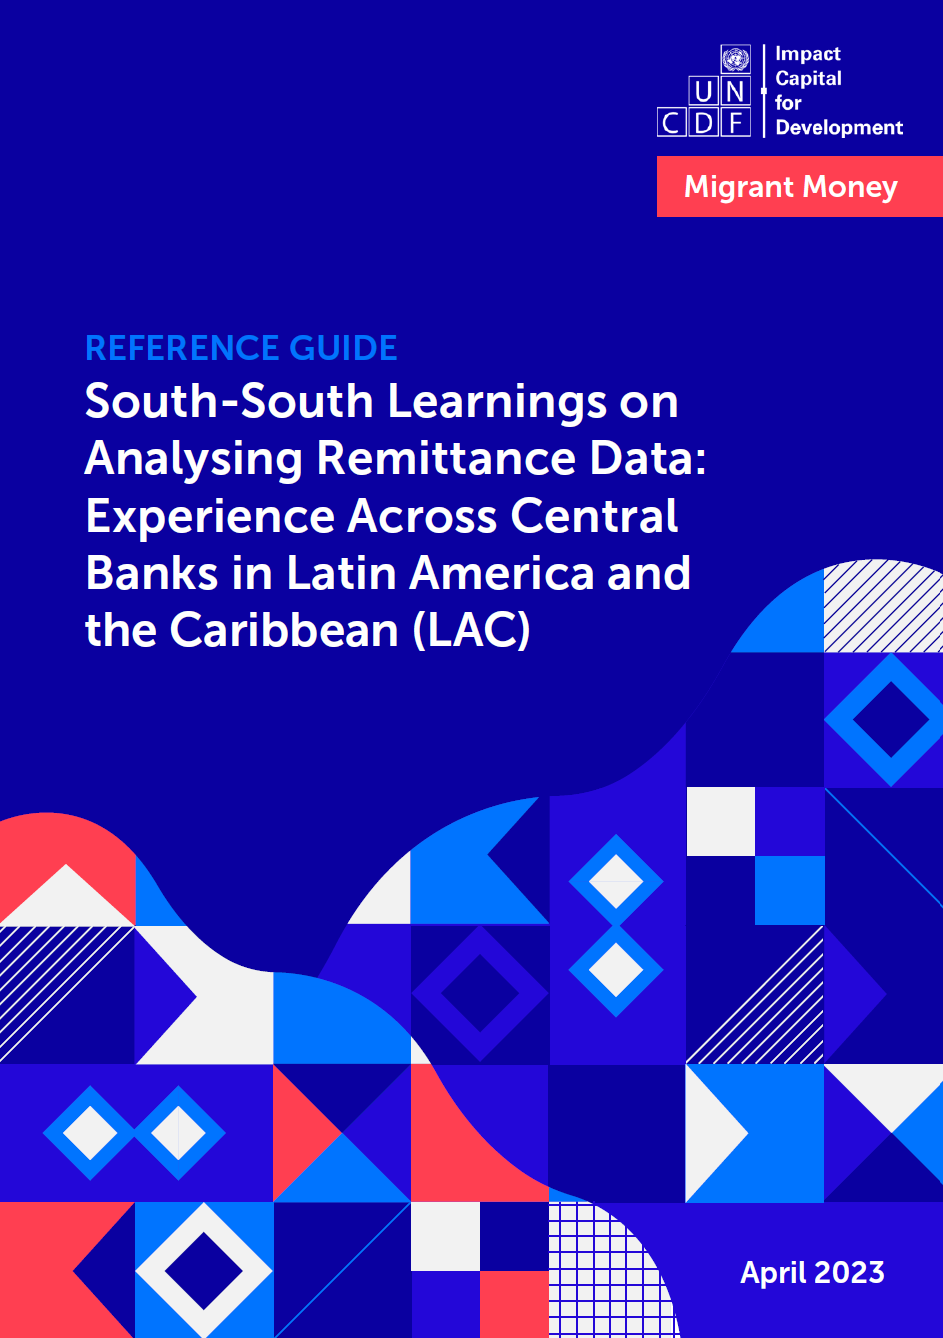 South-South Learnings on Analysing Remittance Data: Experience Across Central Banks in Latin America and the Caribbean (LAC)